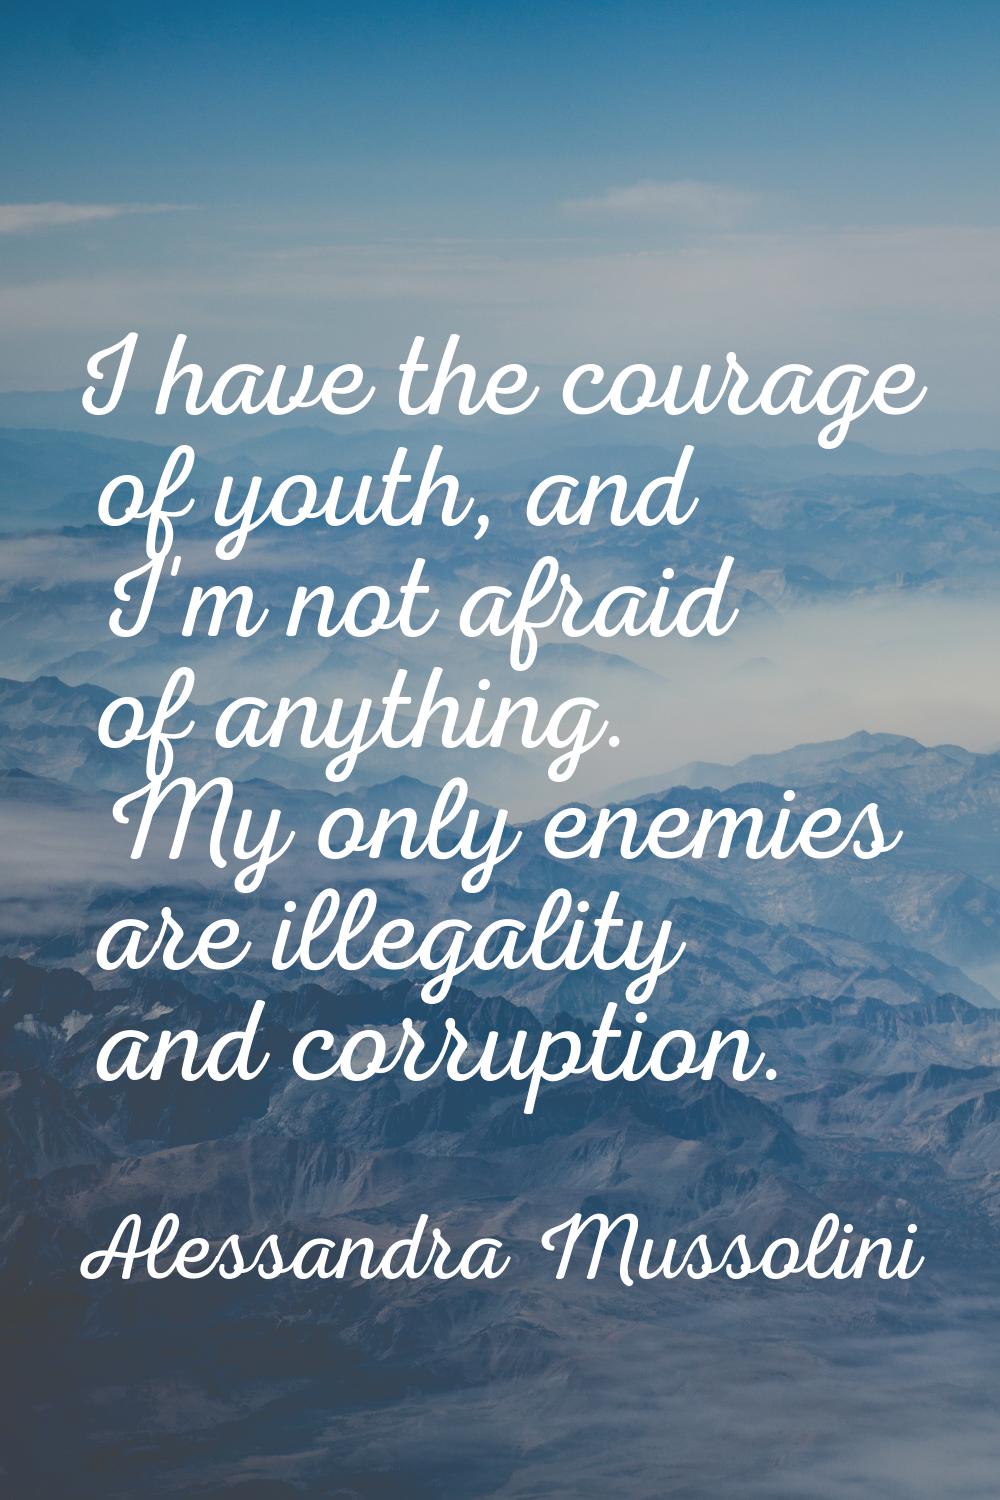 I have the courage of youth, and I'm not afraid of anything. My only enemies are illegality and cor